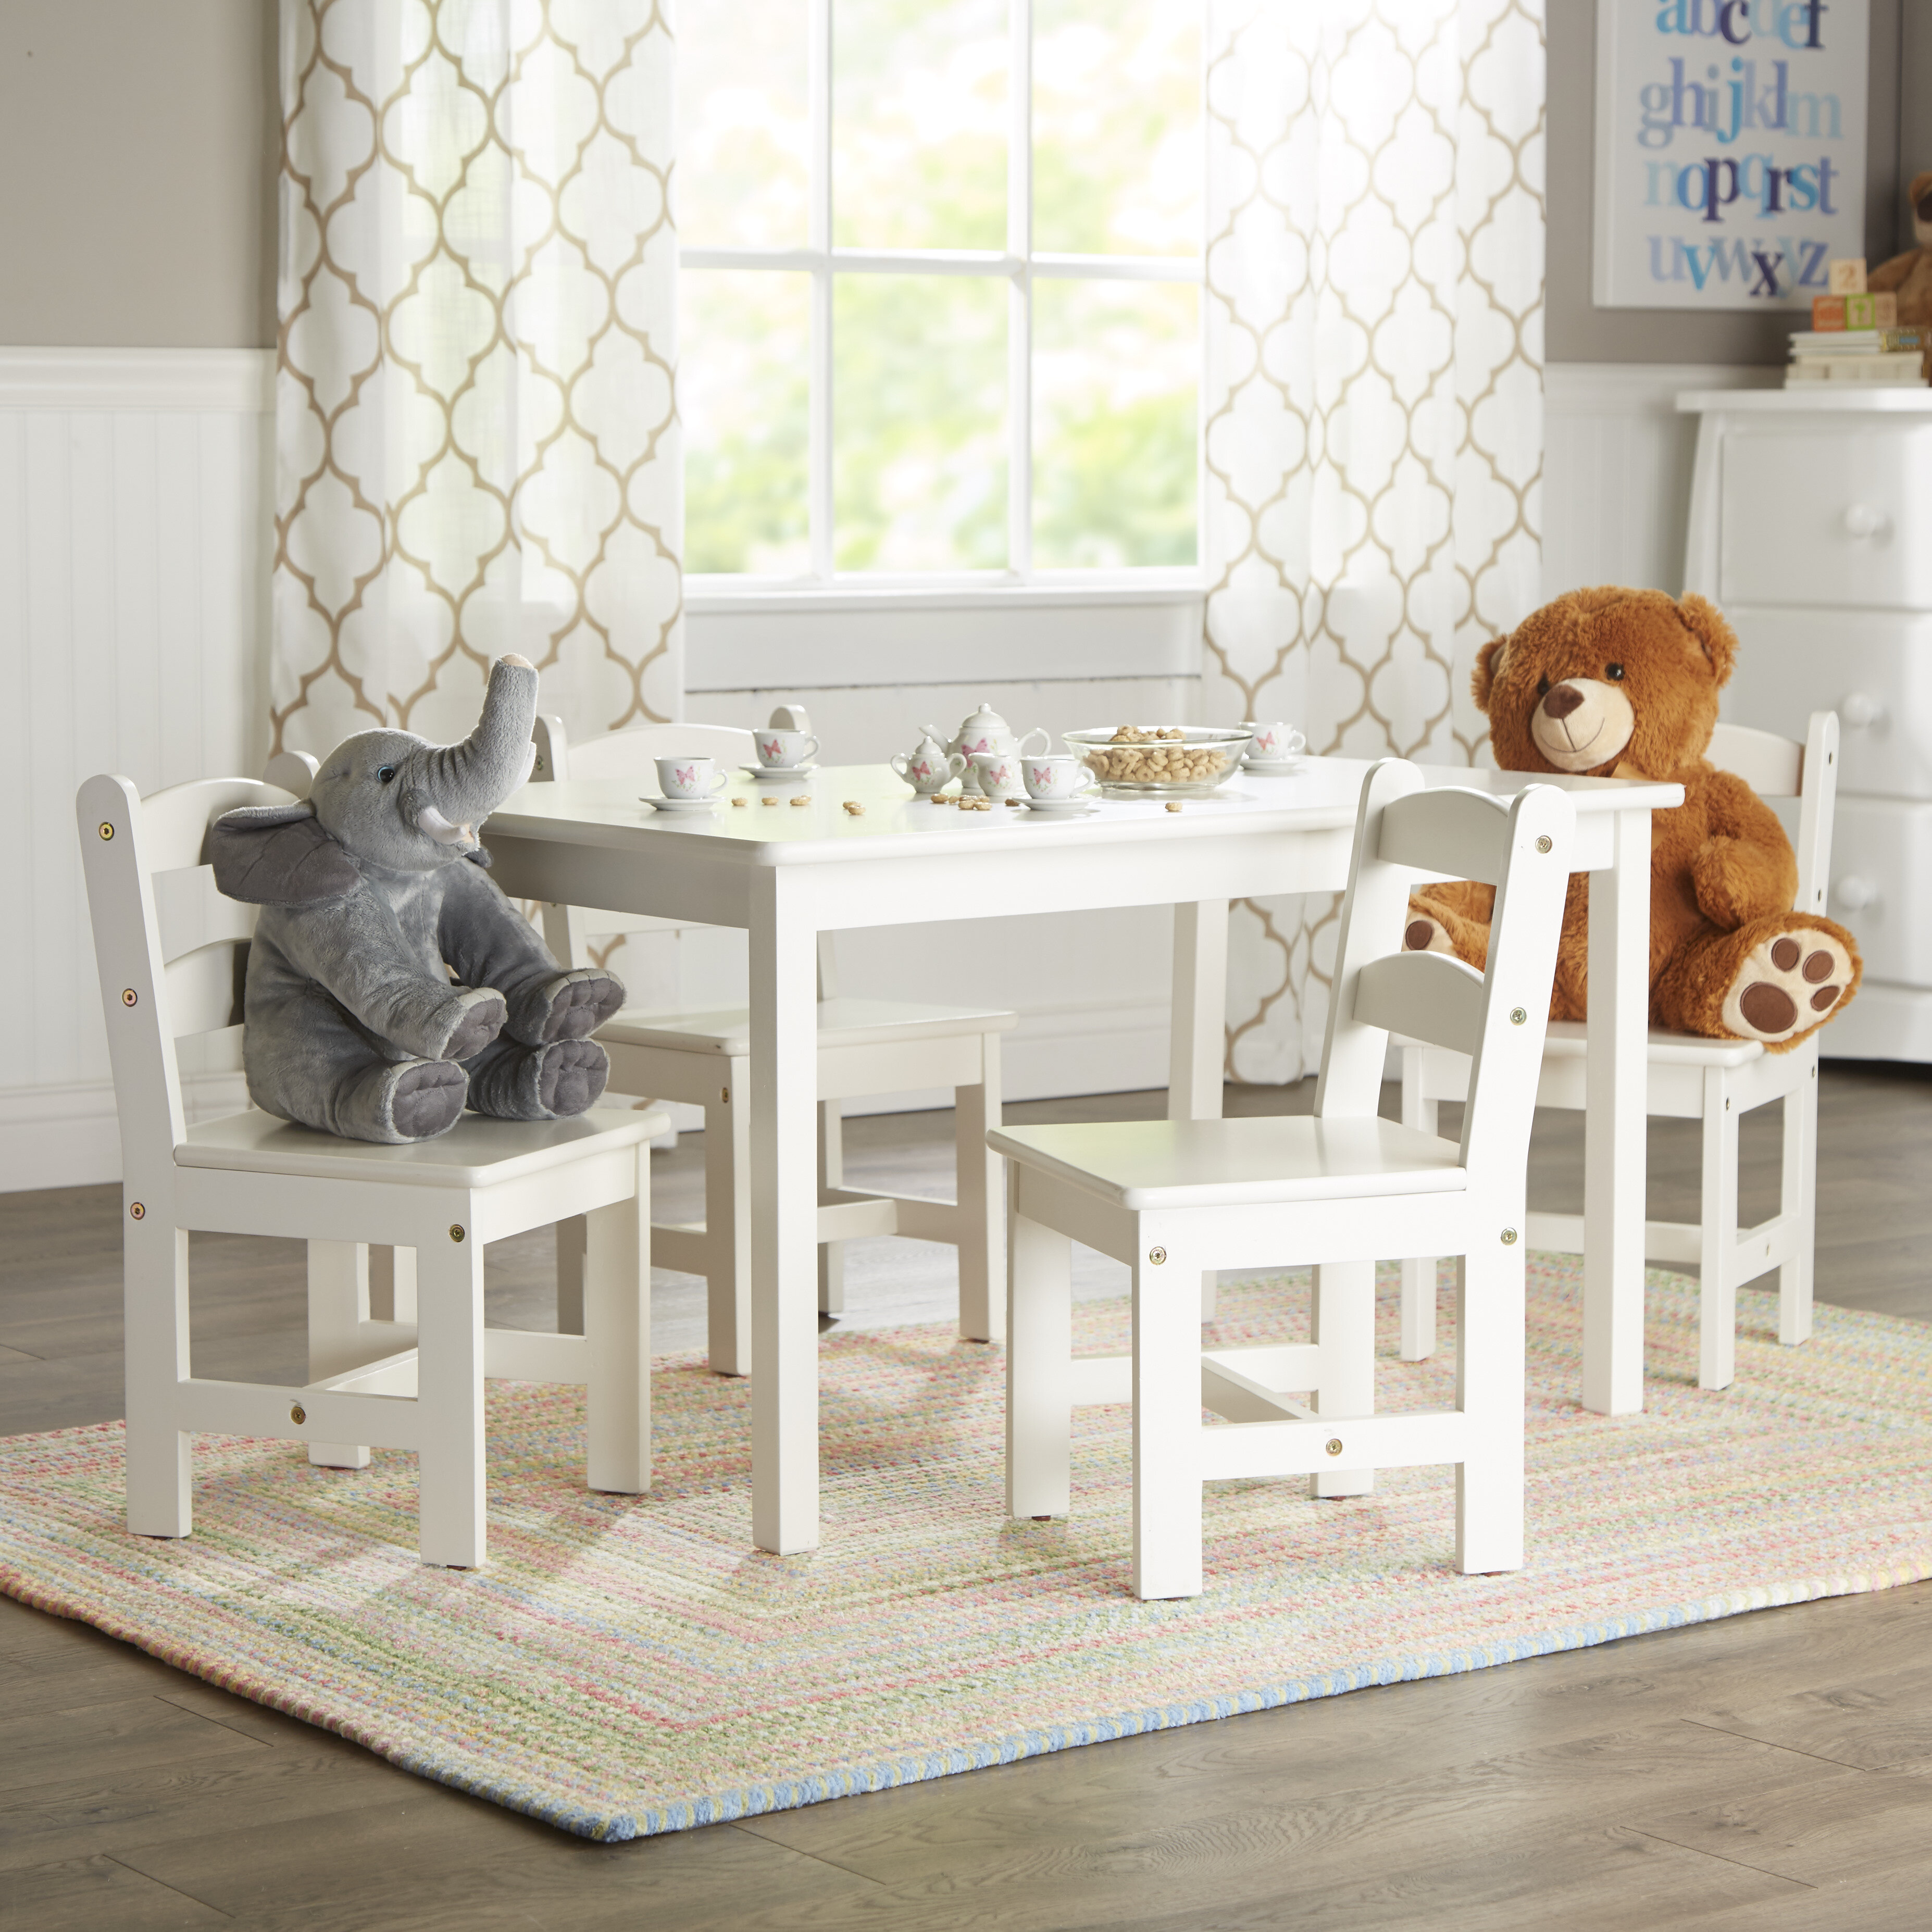 kids 5 piece table and chairs